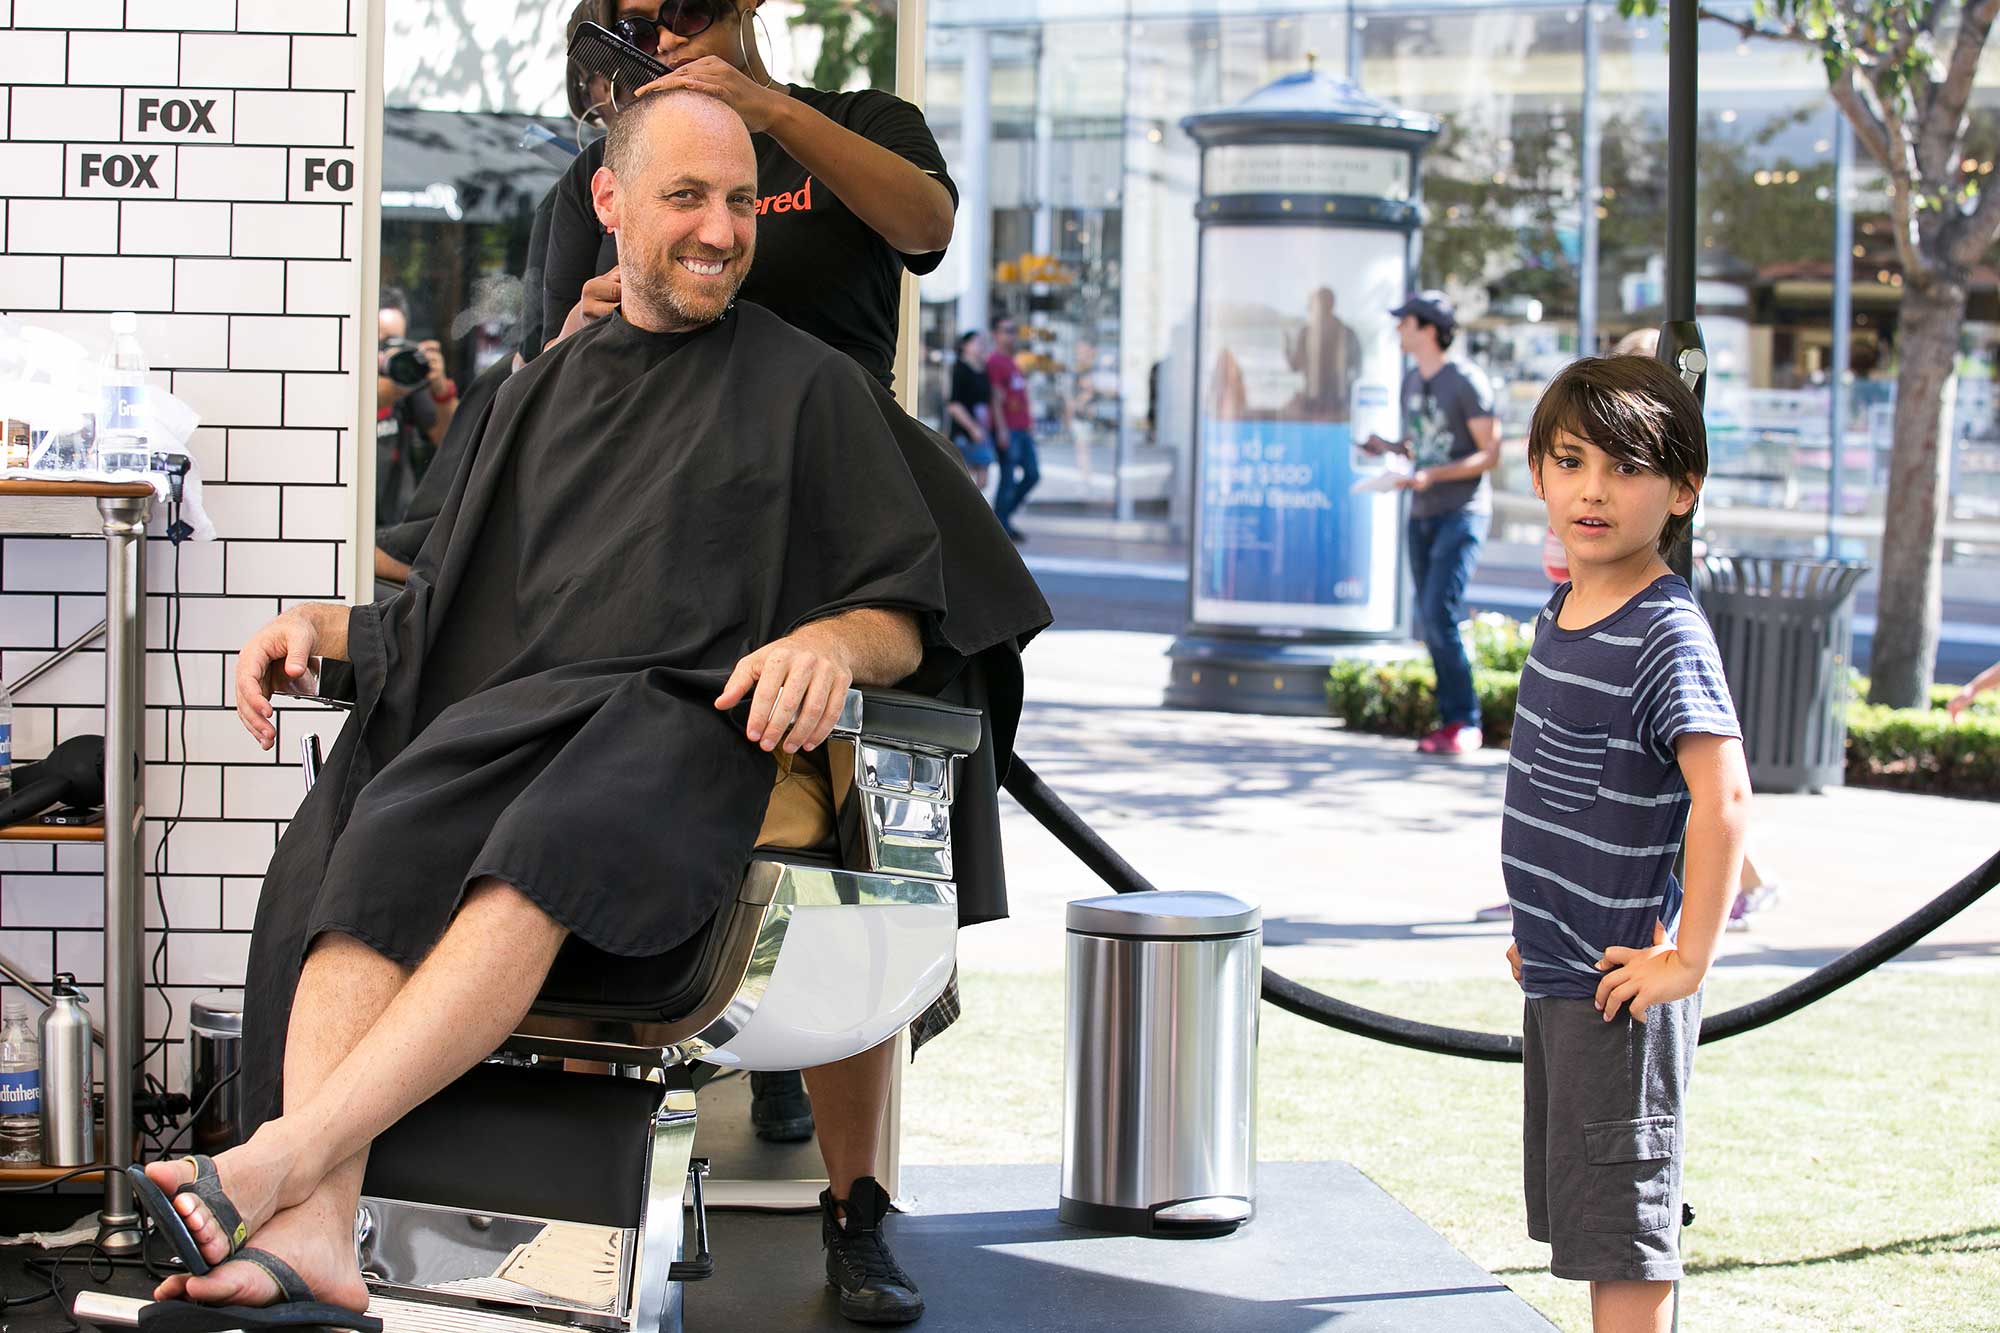 A young guest waits for a free style from the Rudy's Barbershop team.